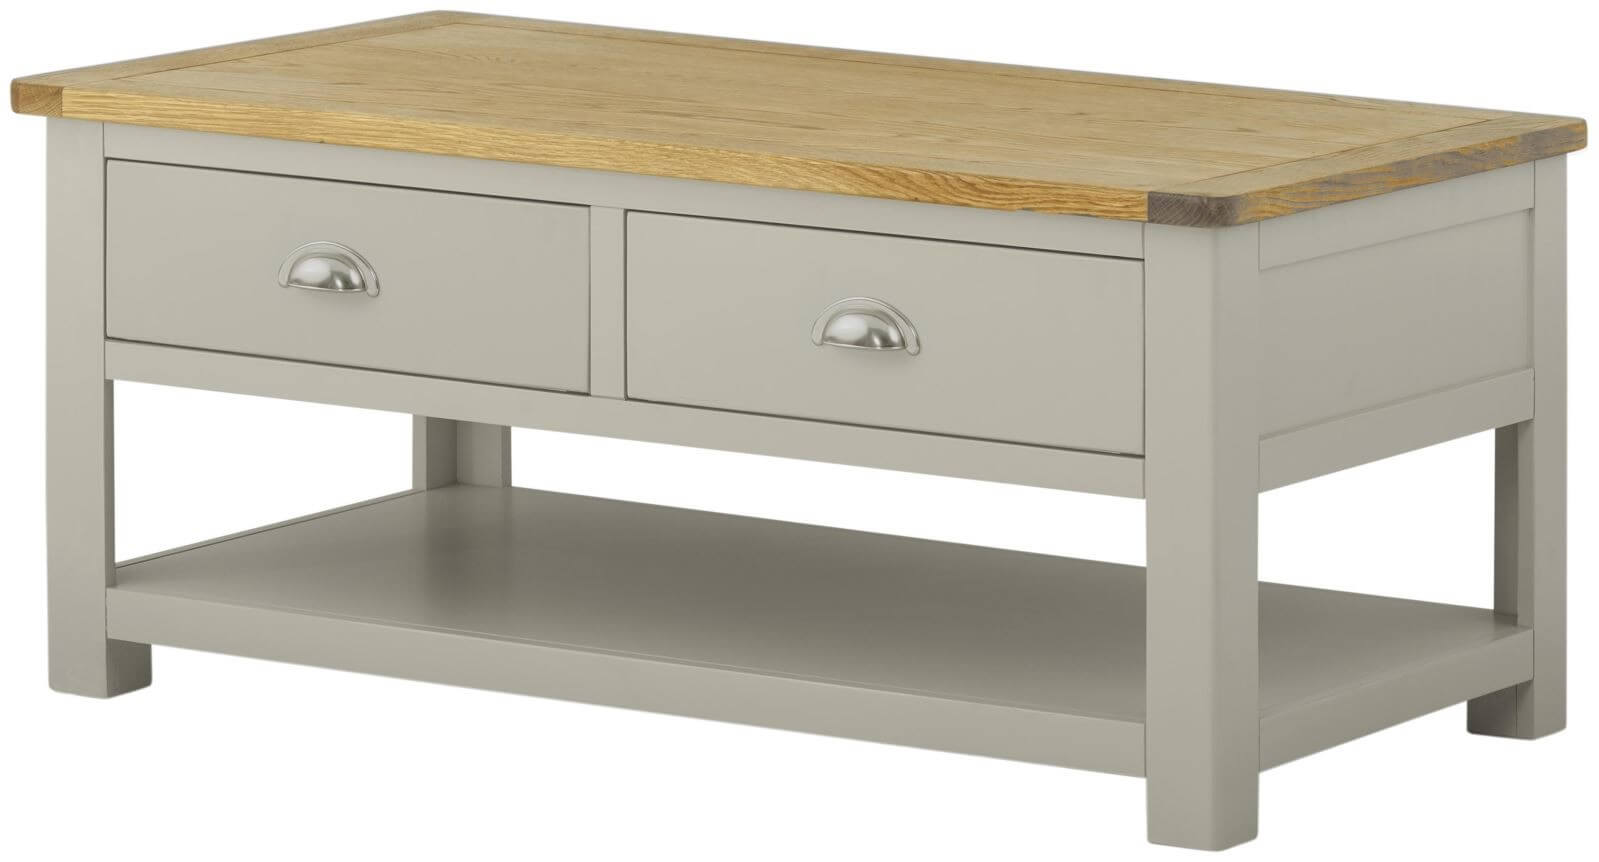 Showing image for Seattle coffee table with drawers - stone